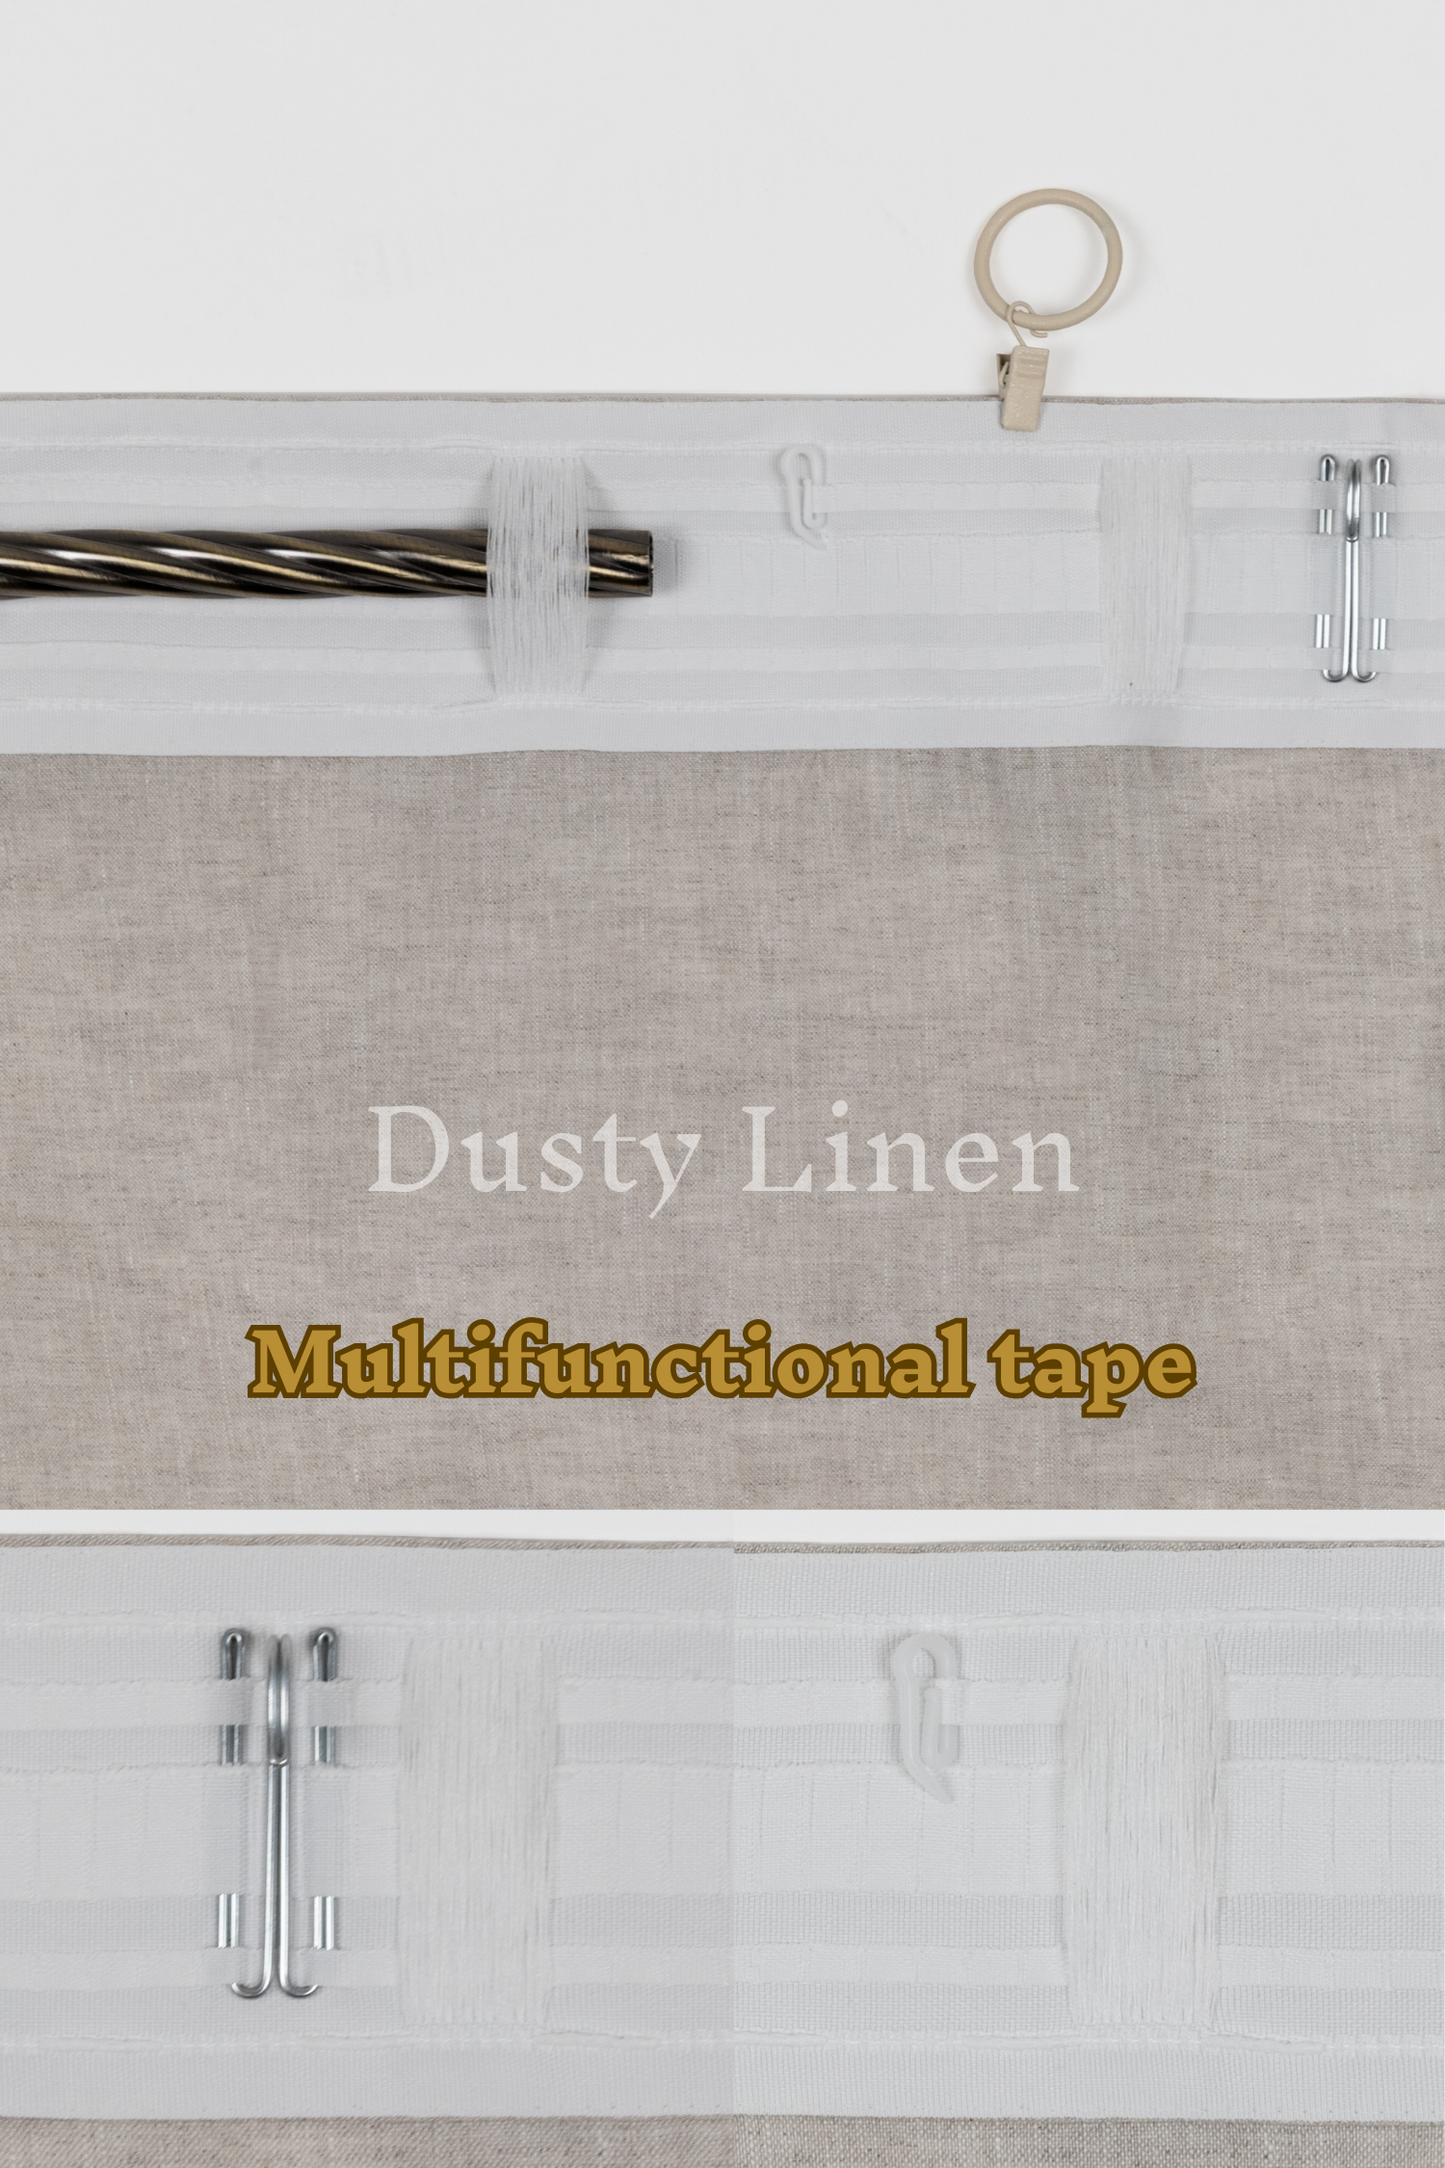 Set of 2 linen curtains (Density: 175 g/m2) in Dusty Rose color